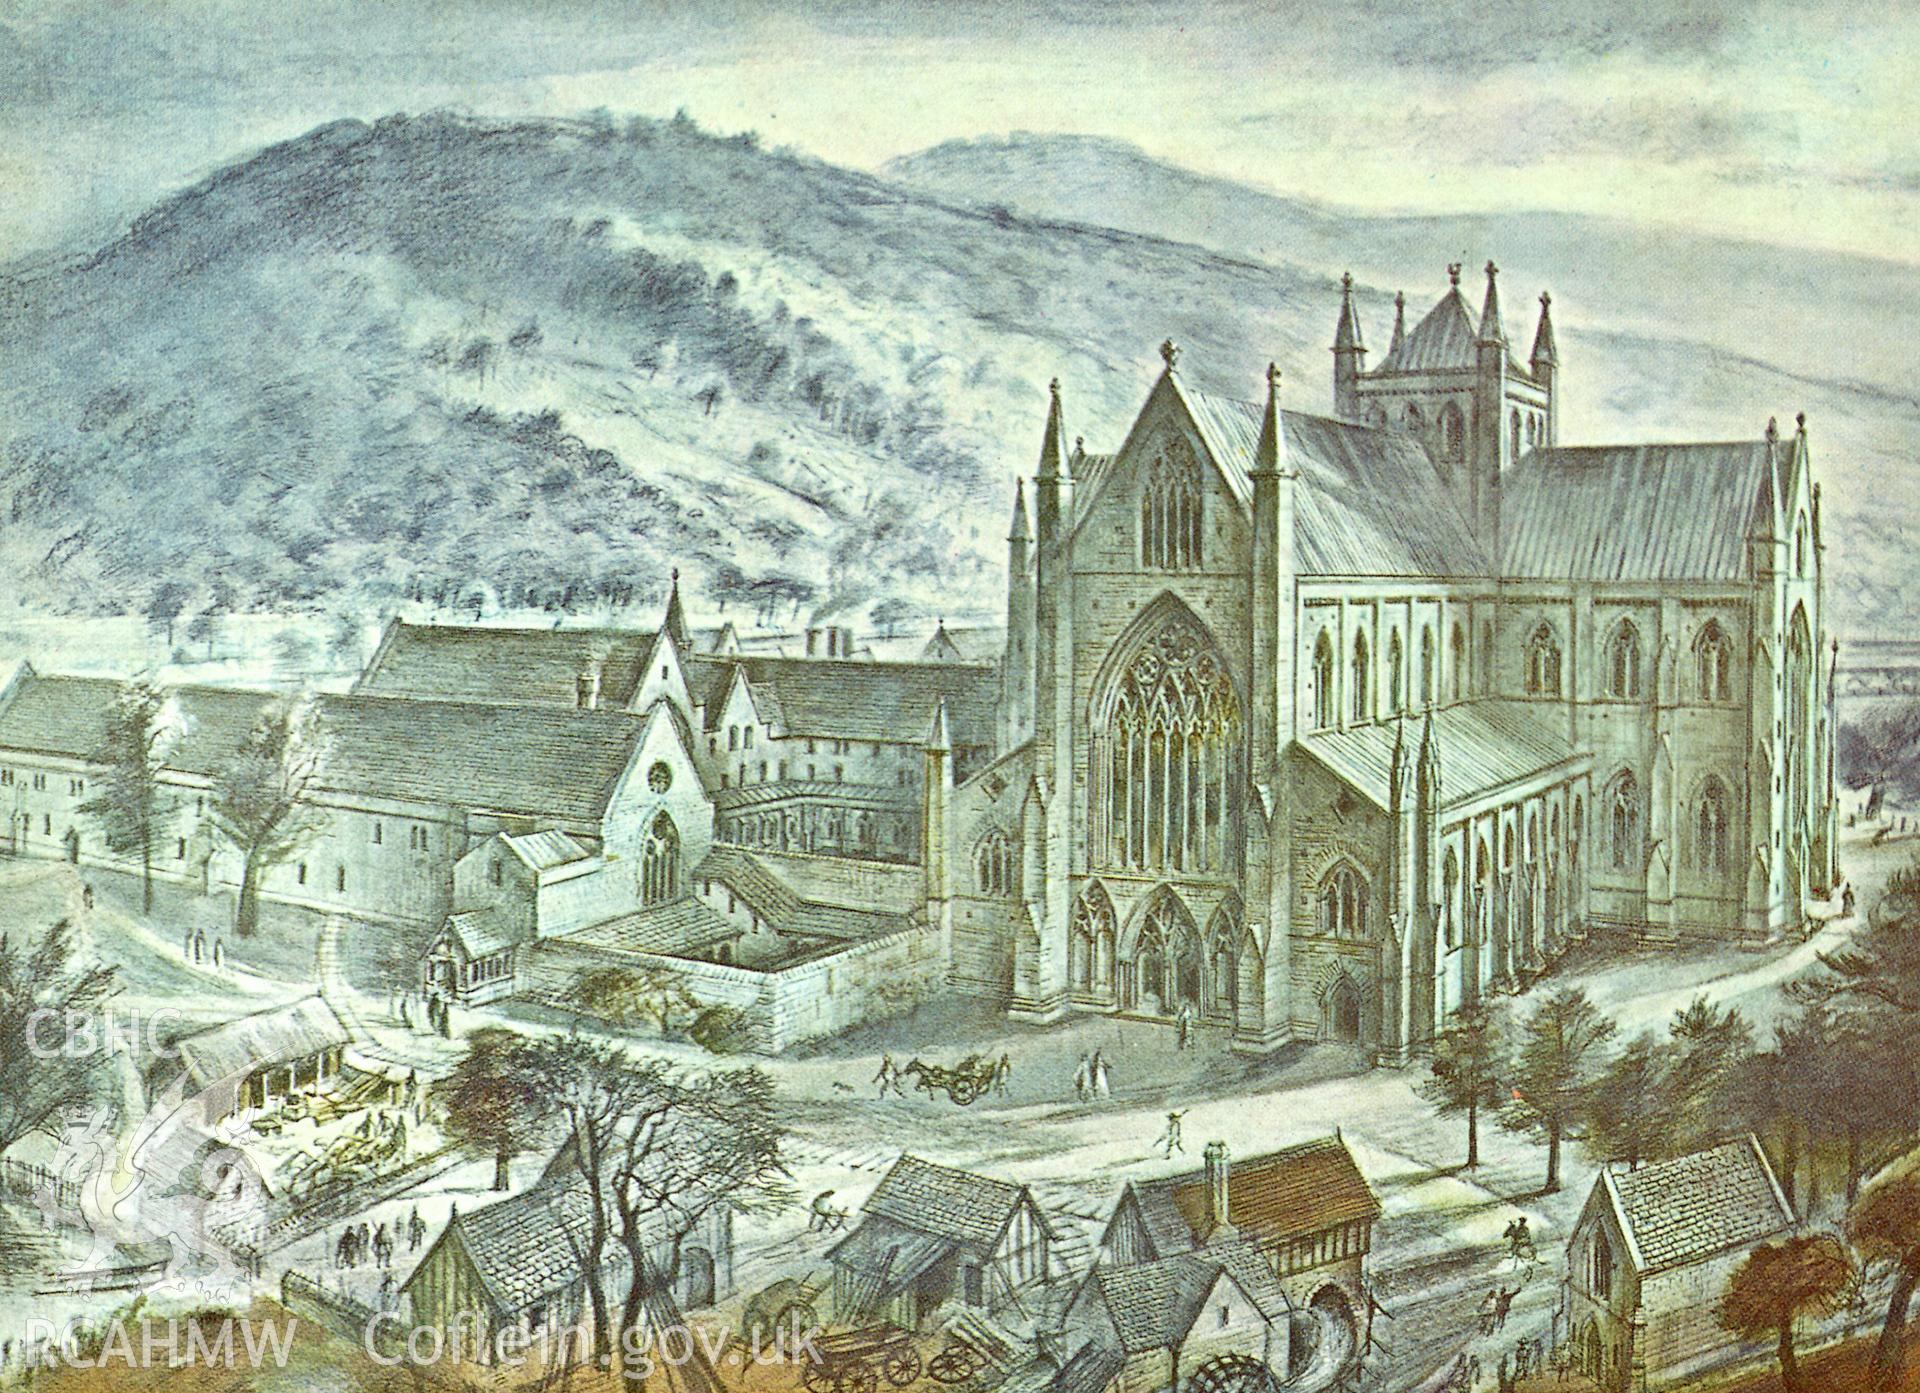 1 colour postcard showing reconstruction drawing of Tintern Abbey by Alan Sorrell; collated by the former Central Office of Information.